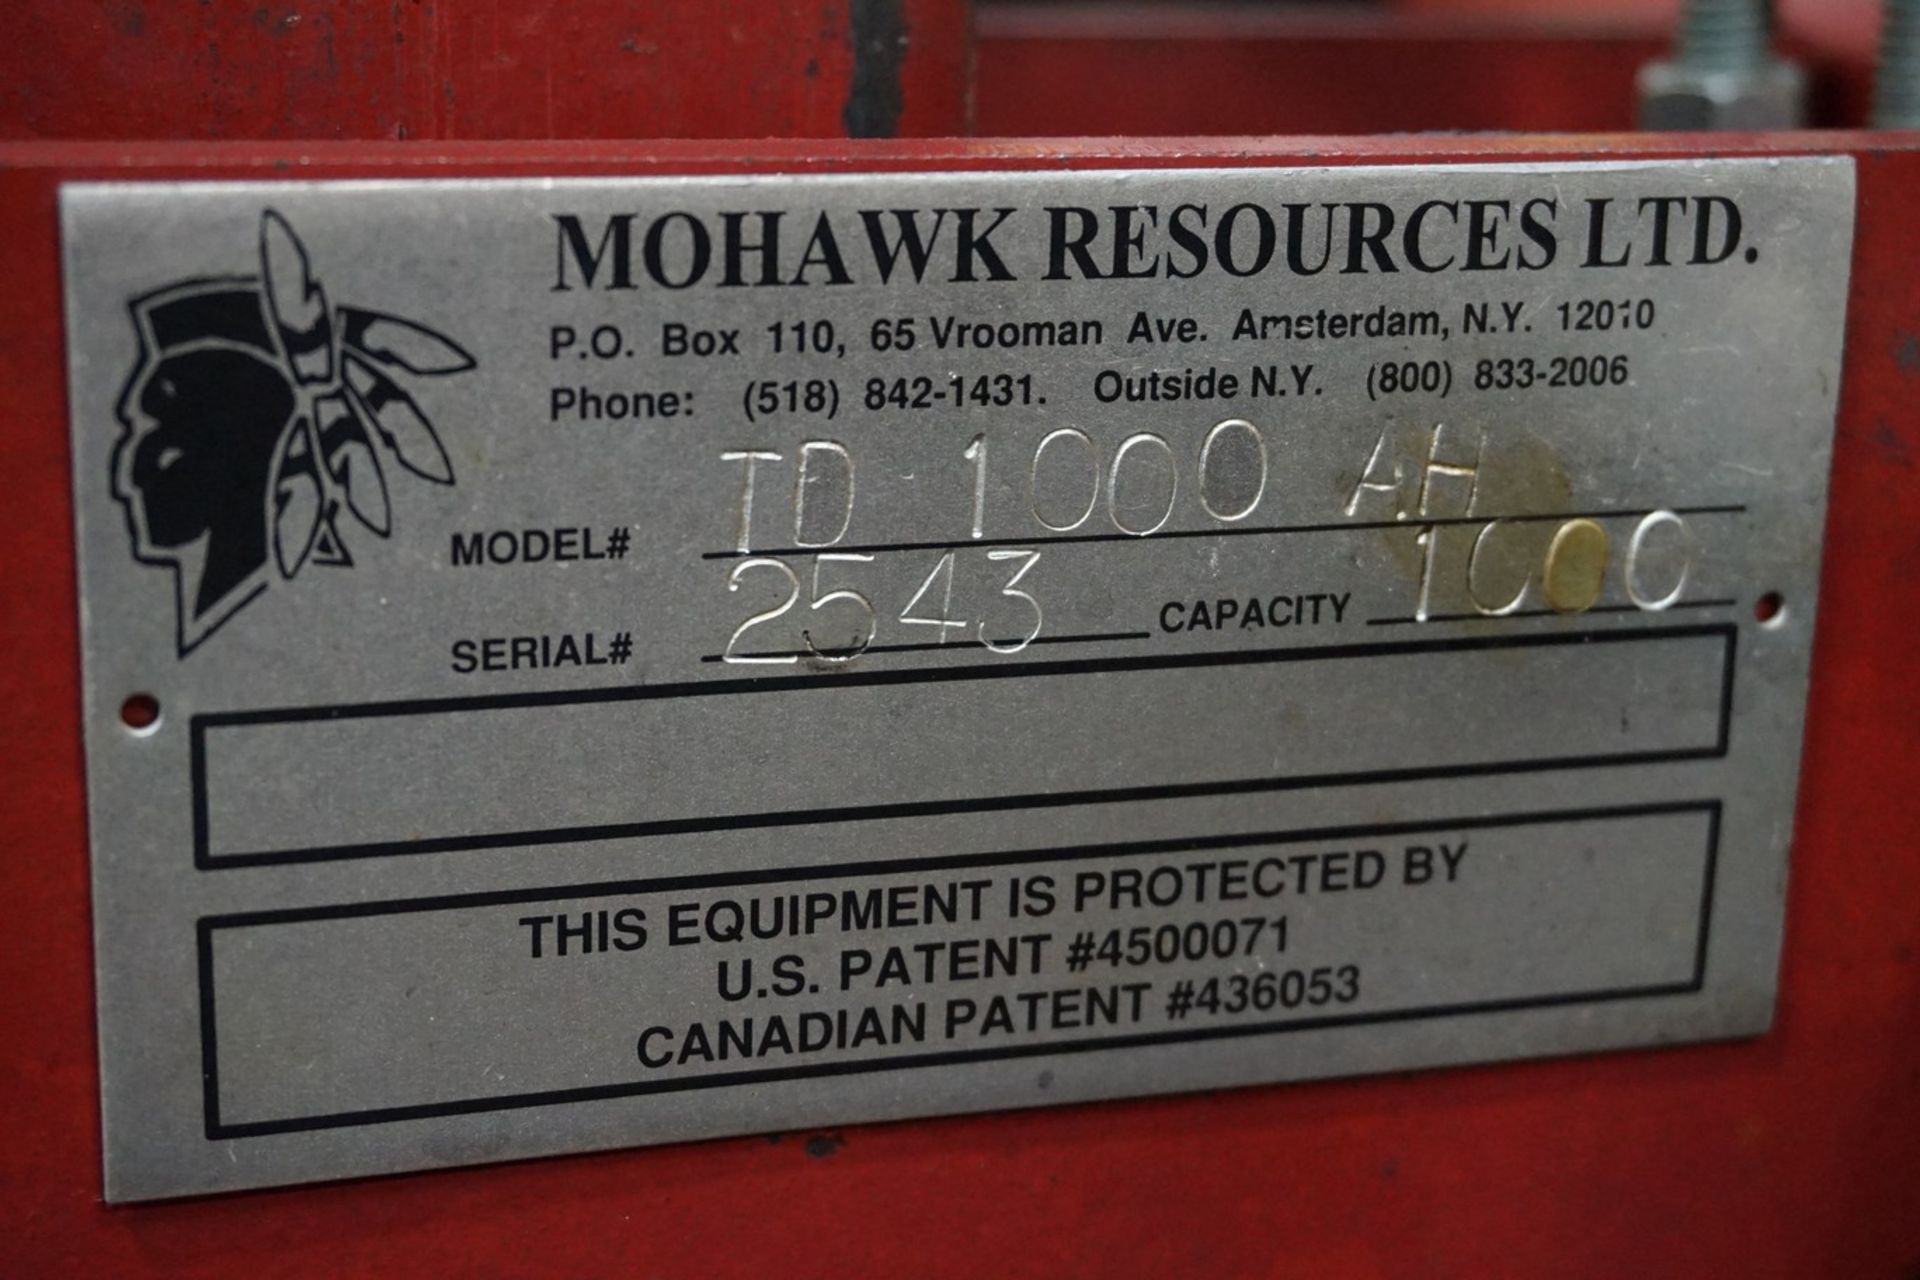 Mohawk Model TD1000AH 1000-Lbs Capacity Tire Carrier - Image 3 of 3